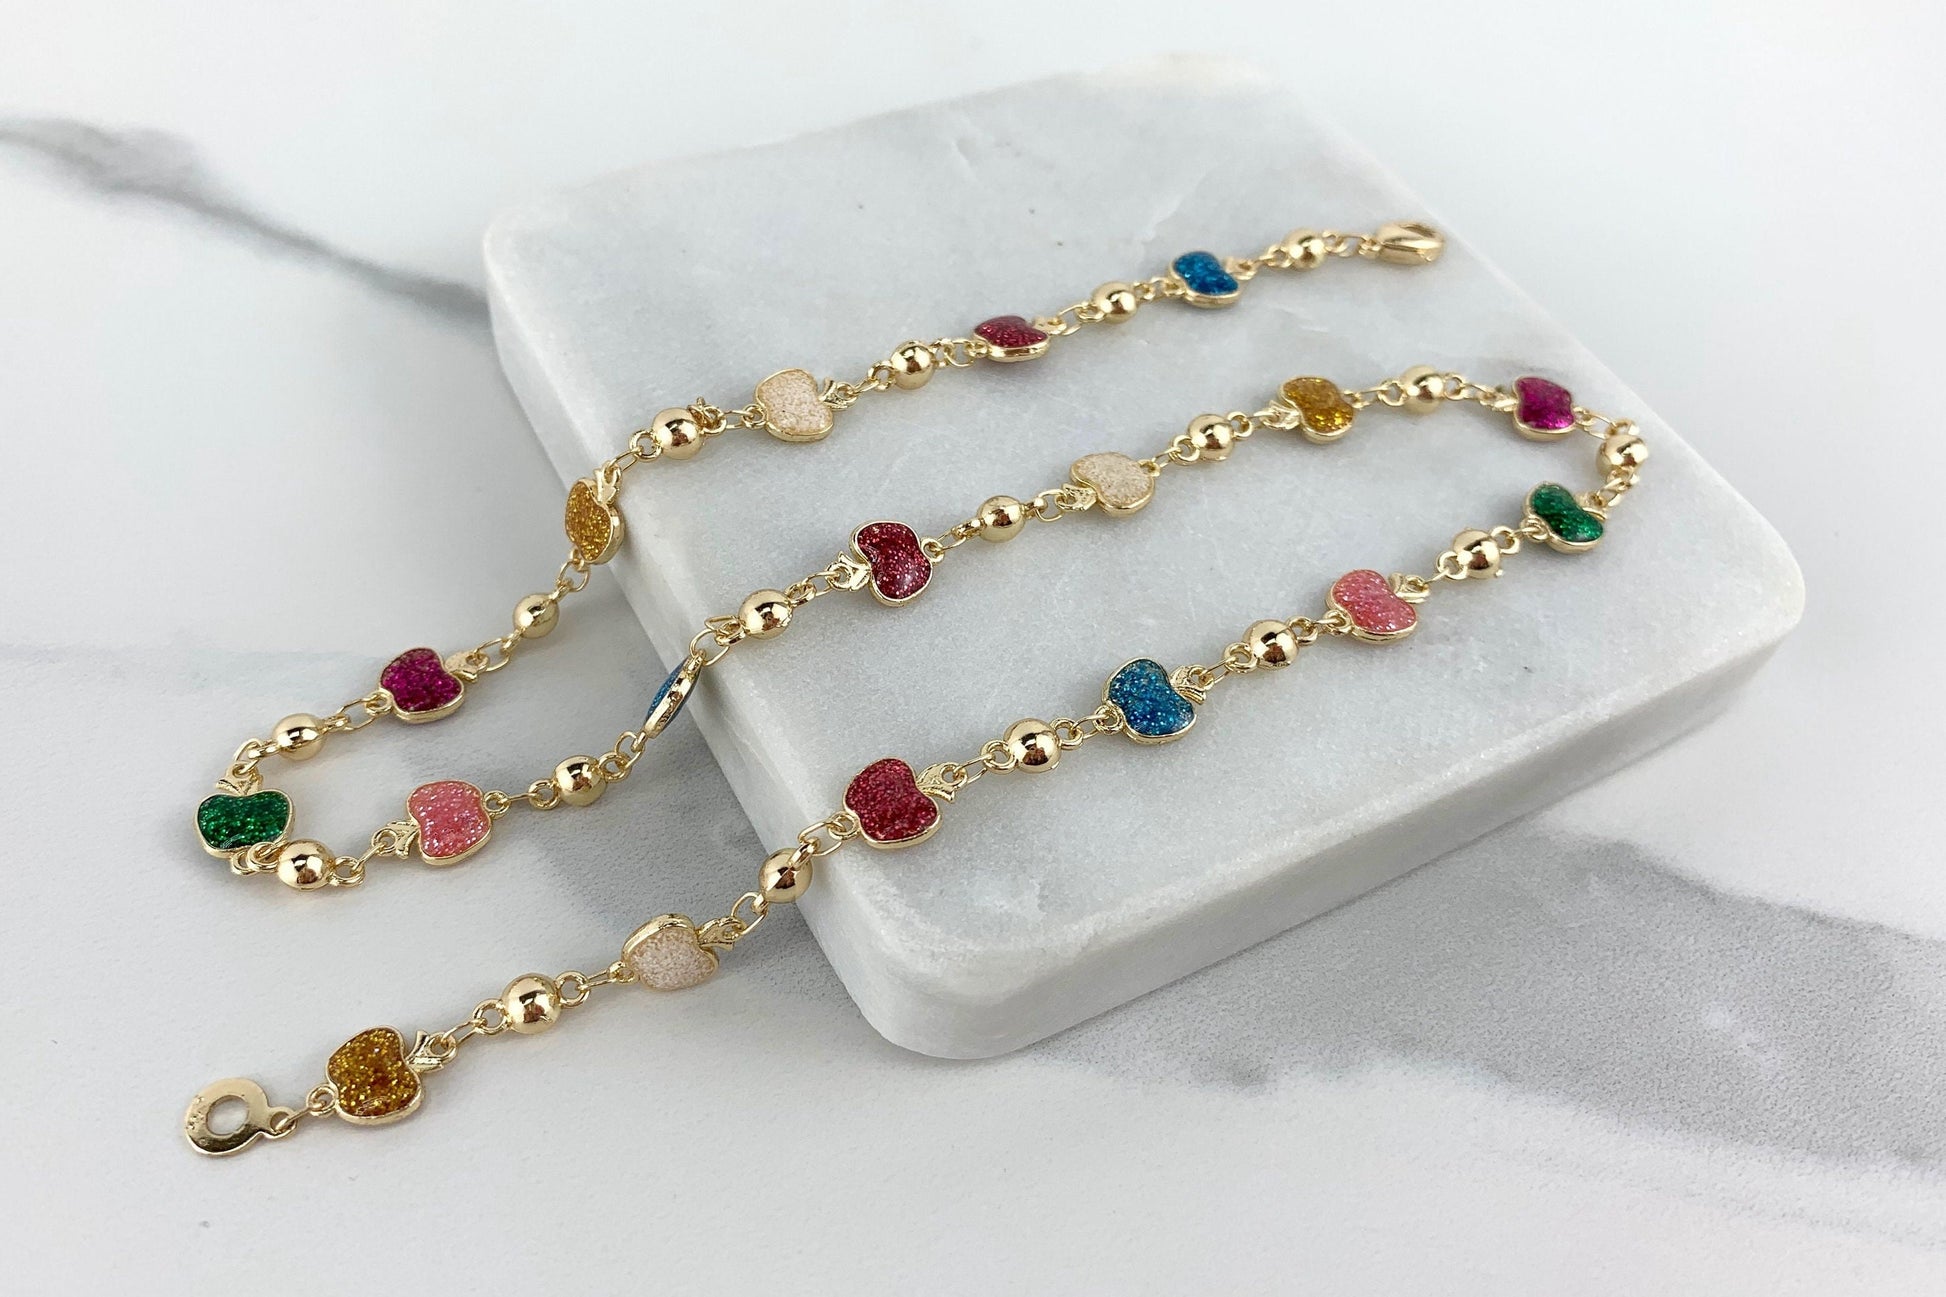 18k Gold Filled Ball Chain with Colorful Sparkle Simulated Druse Stones Apple Necklace Wholesale Jewelry Supplies